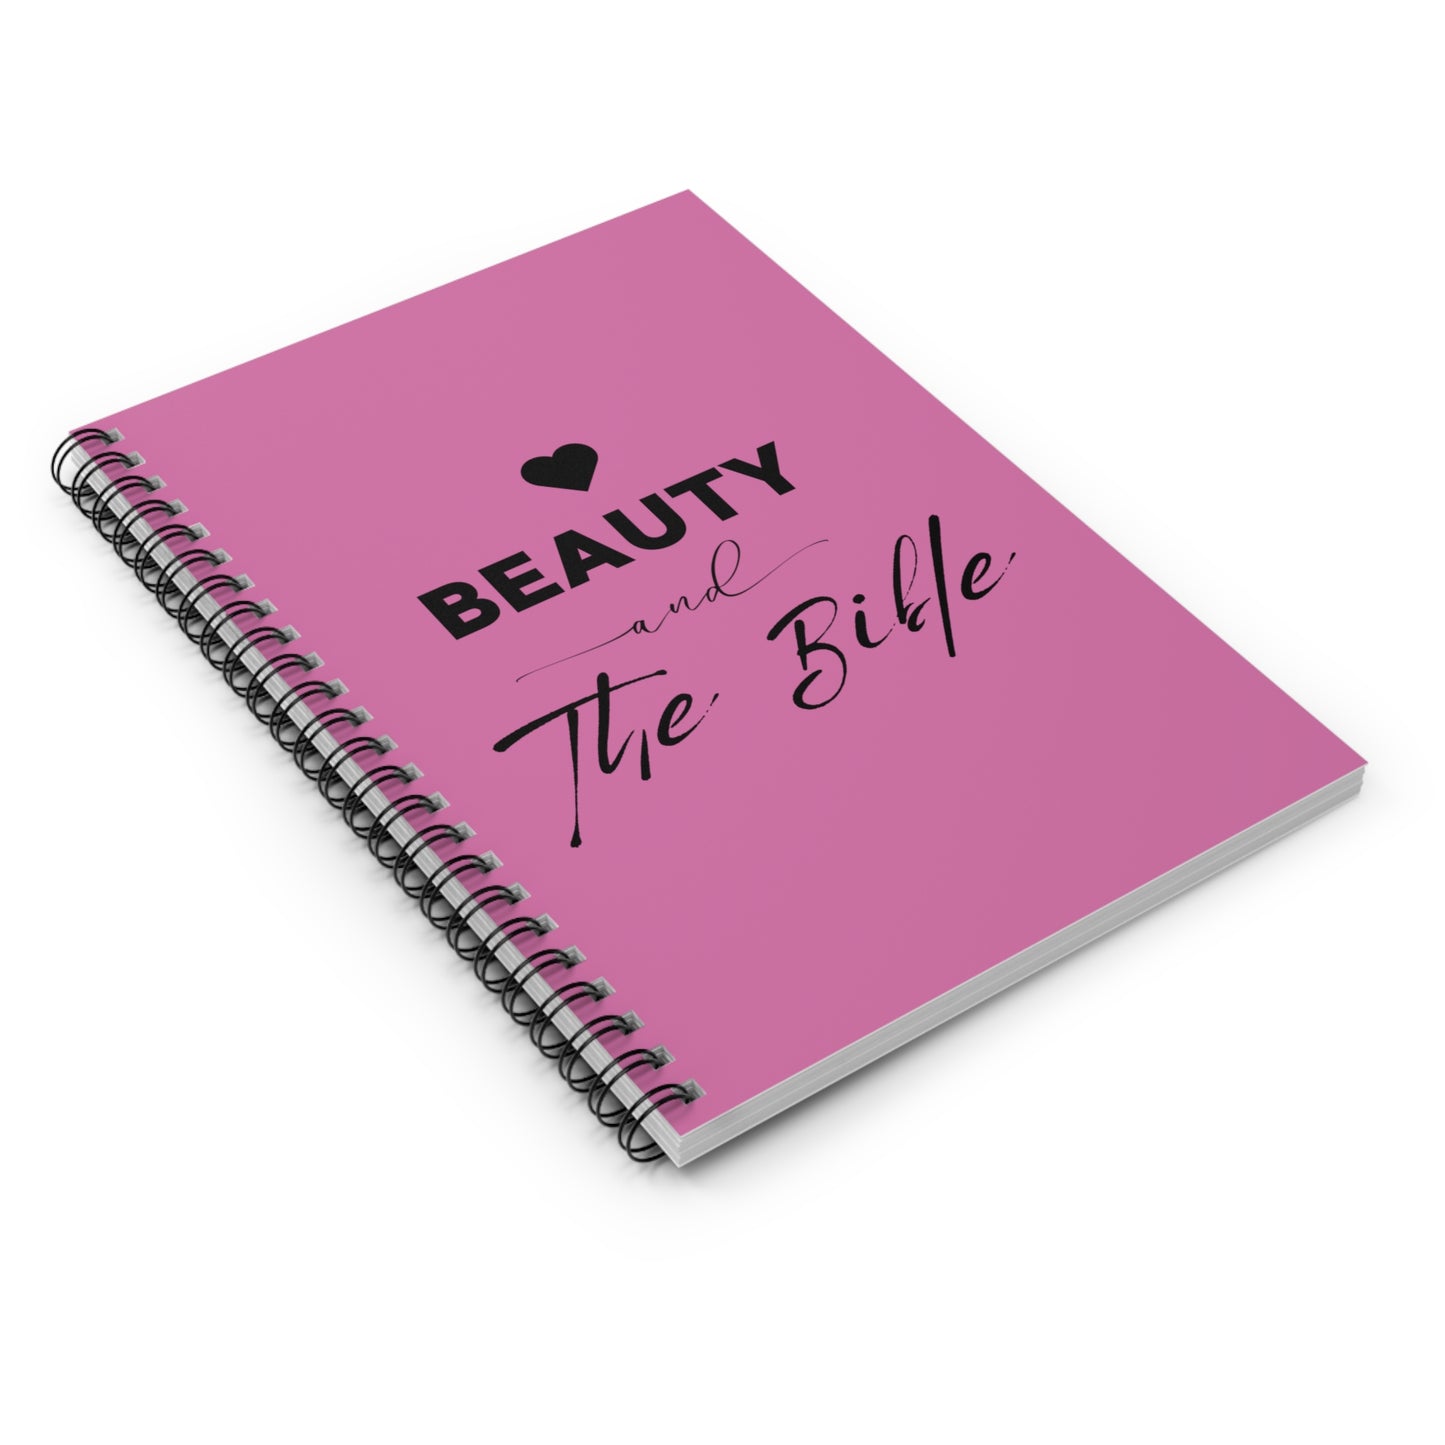 Beauty and the Bible Spiral Notebook - Ruled Line